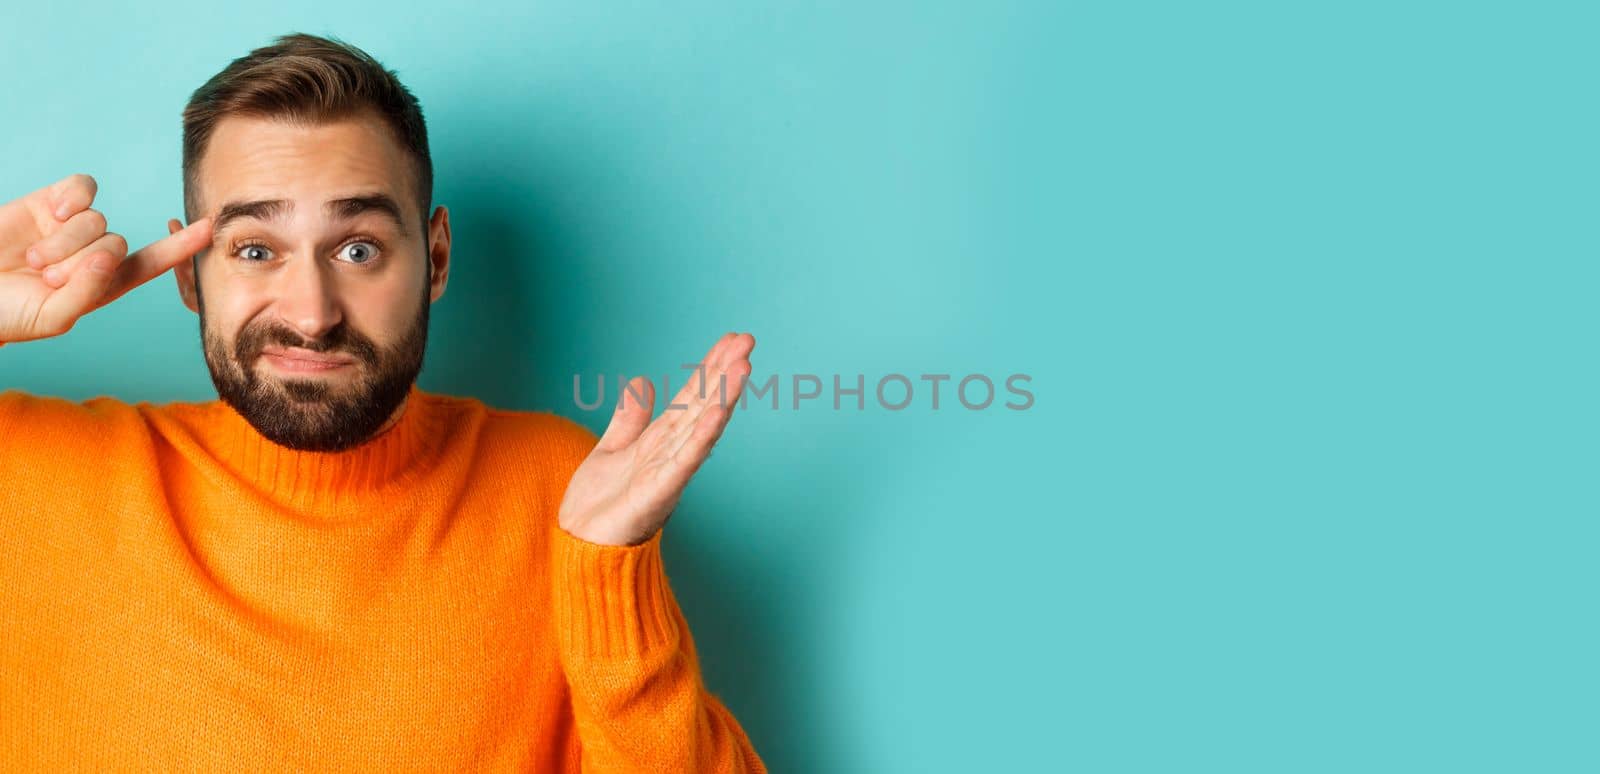 Close-up of man expressing disdain, scolding person, pointing finger at head and looking at camera, standing over light blue background.